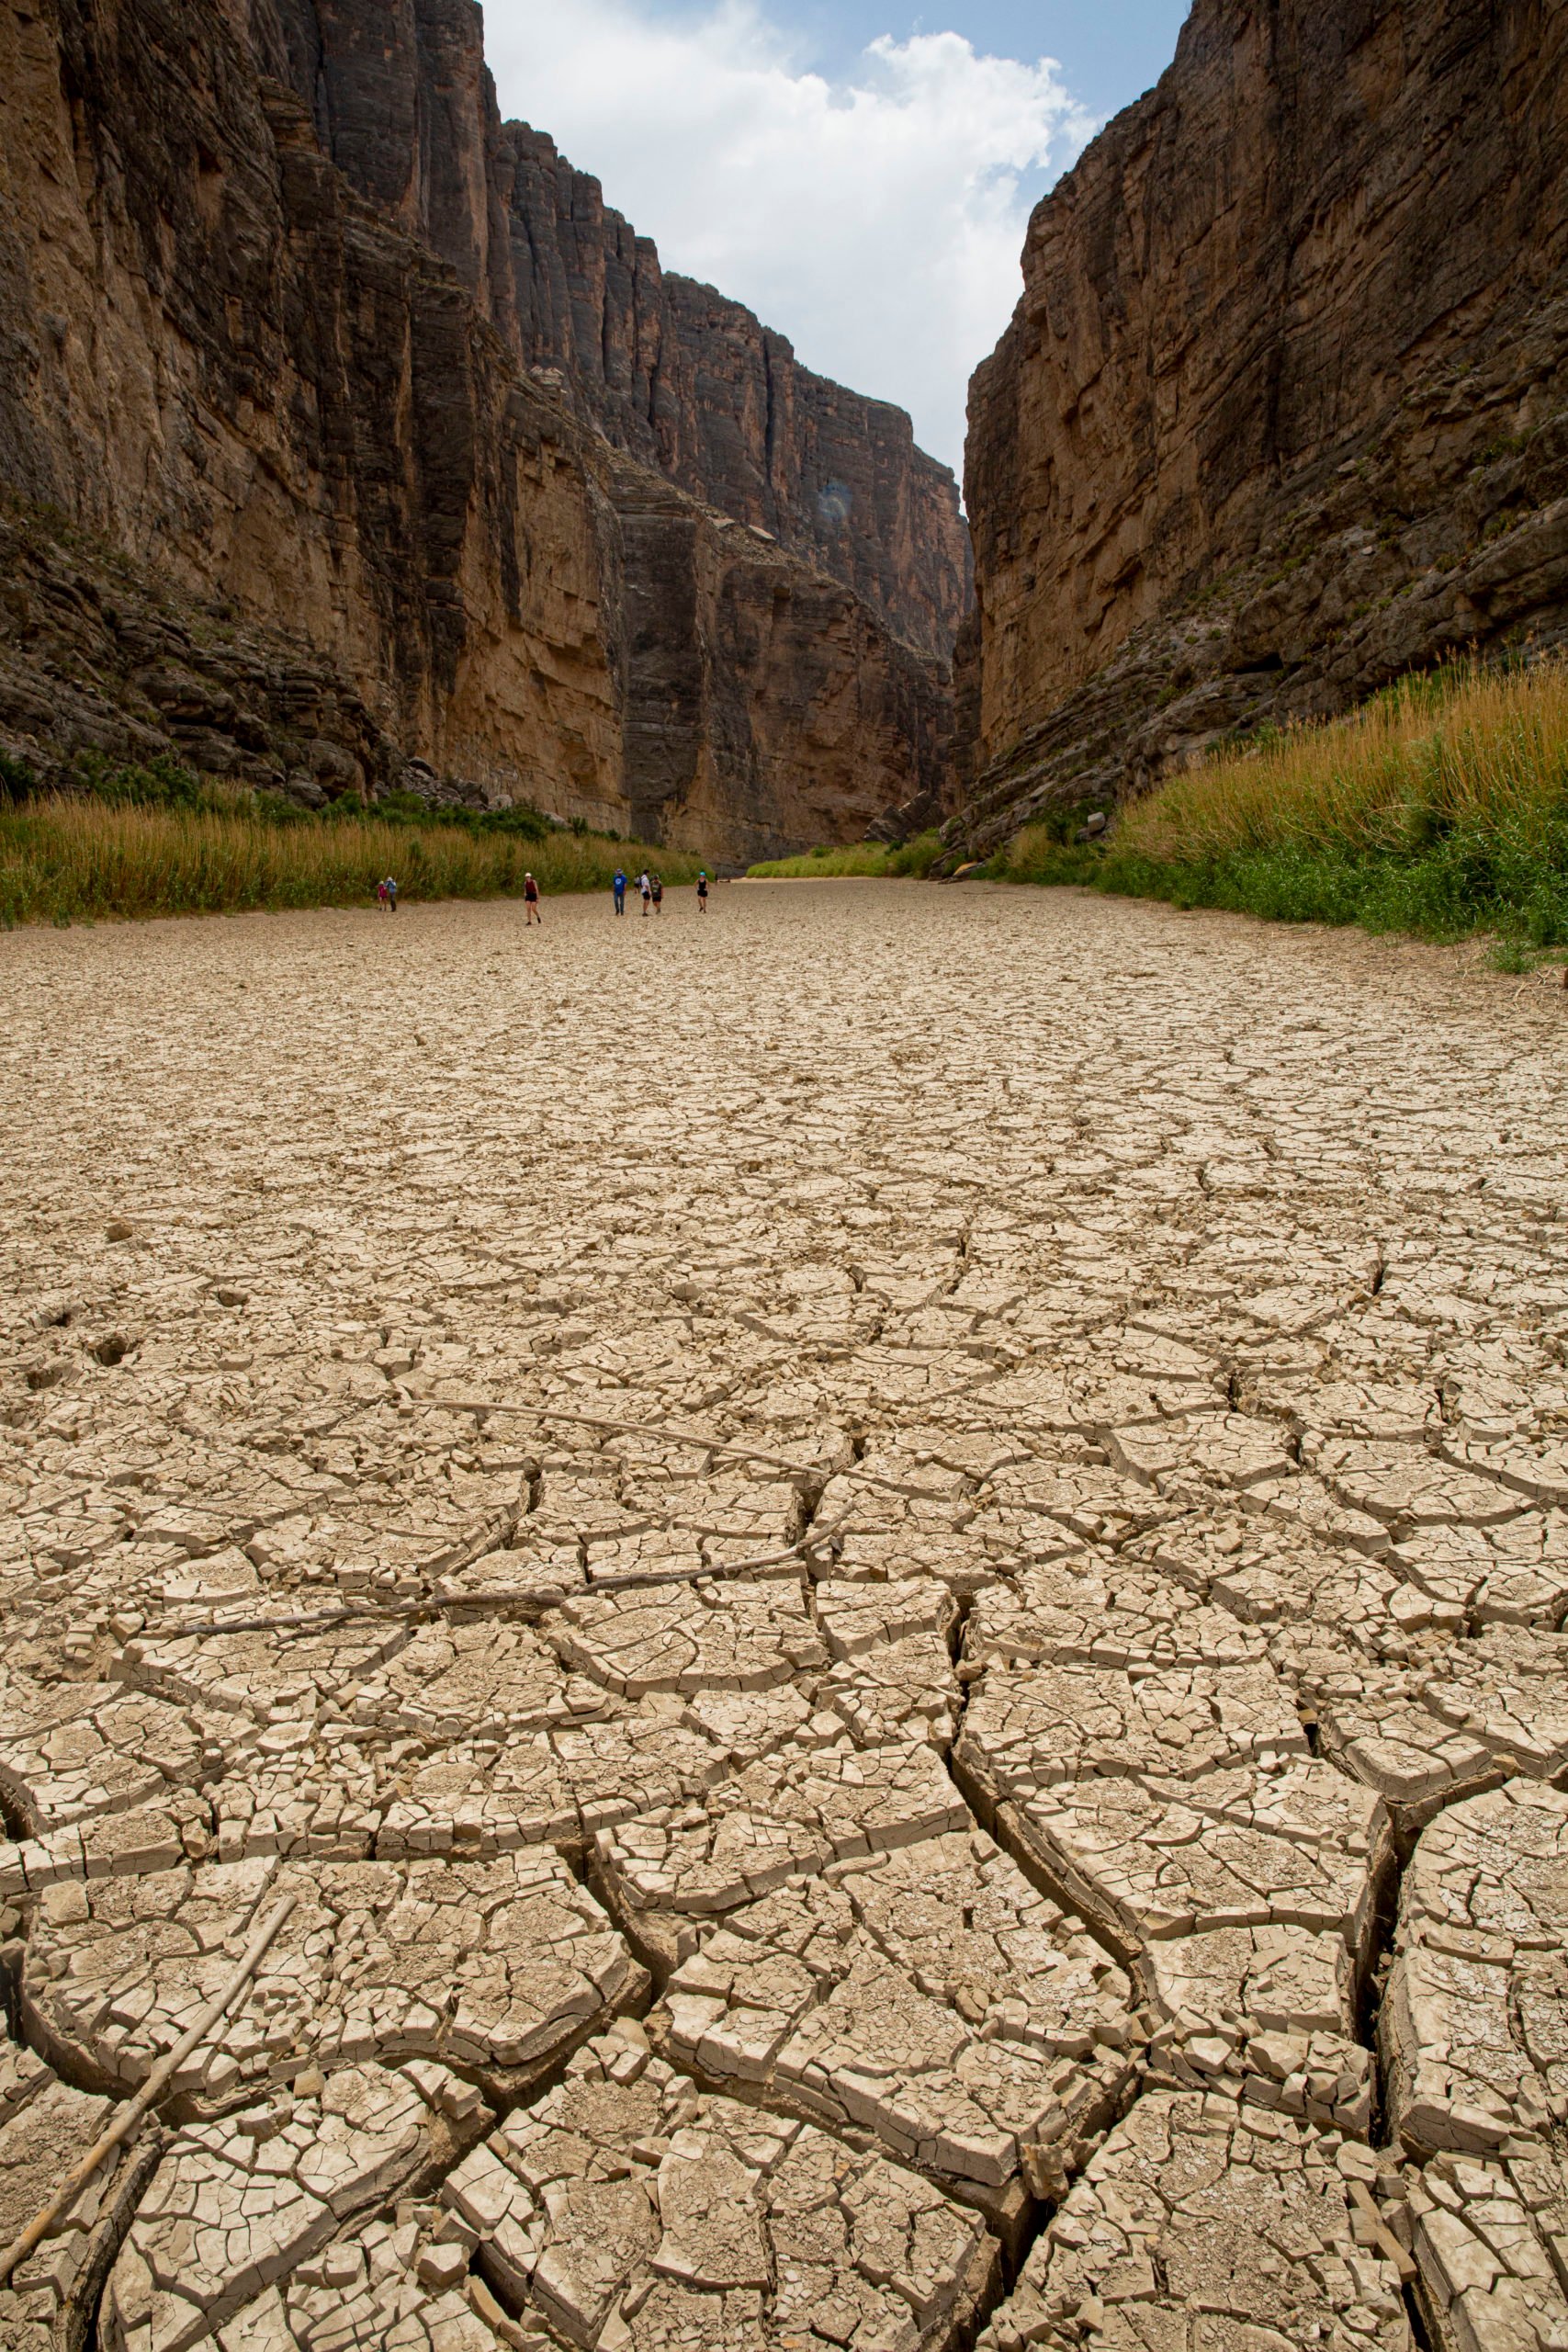 A few solitary figures can be seen walking on the cracked, dry earth where the Rio Grande once ran, lined on either side by tall canyon walls curving into the distance.